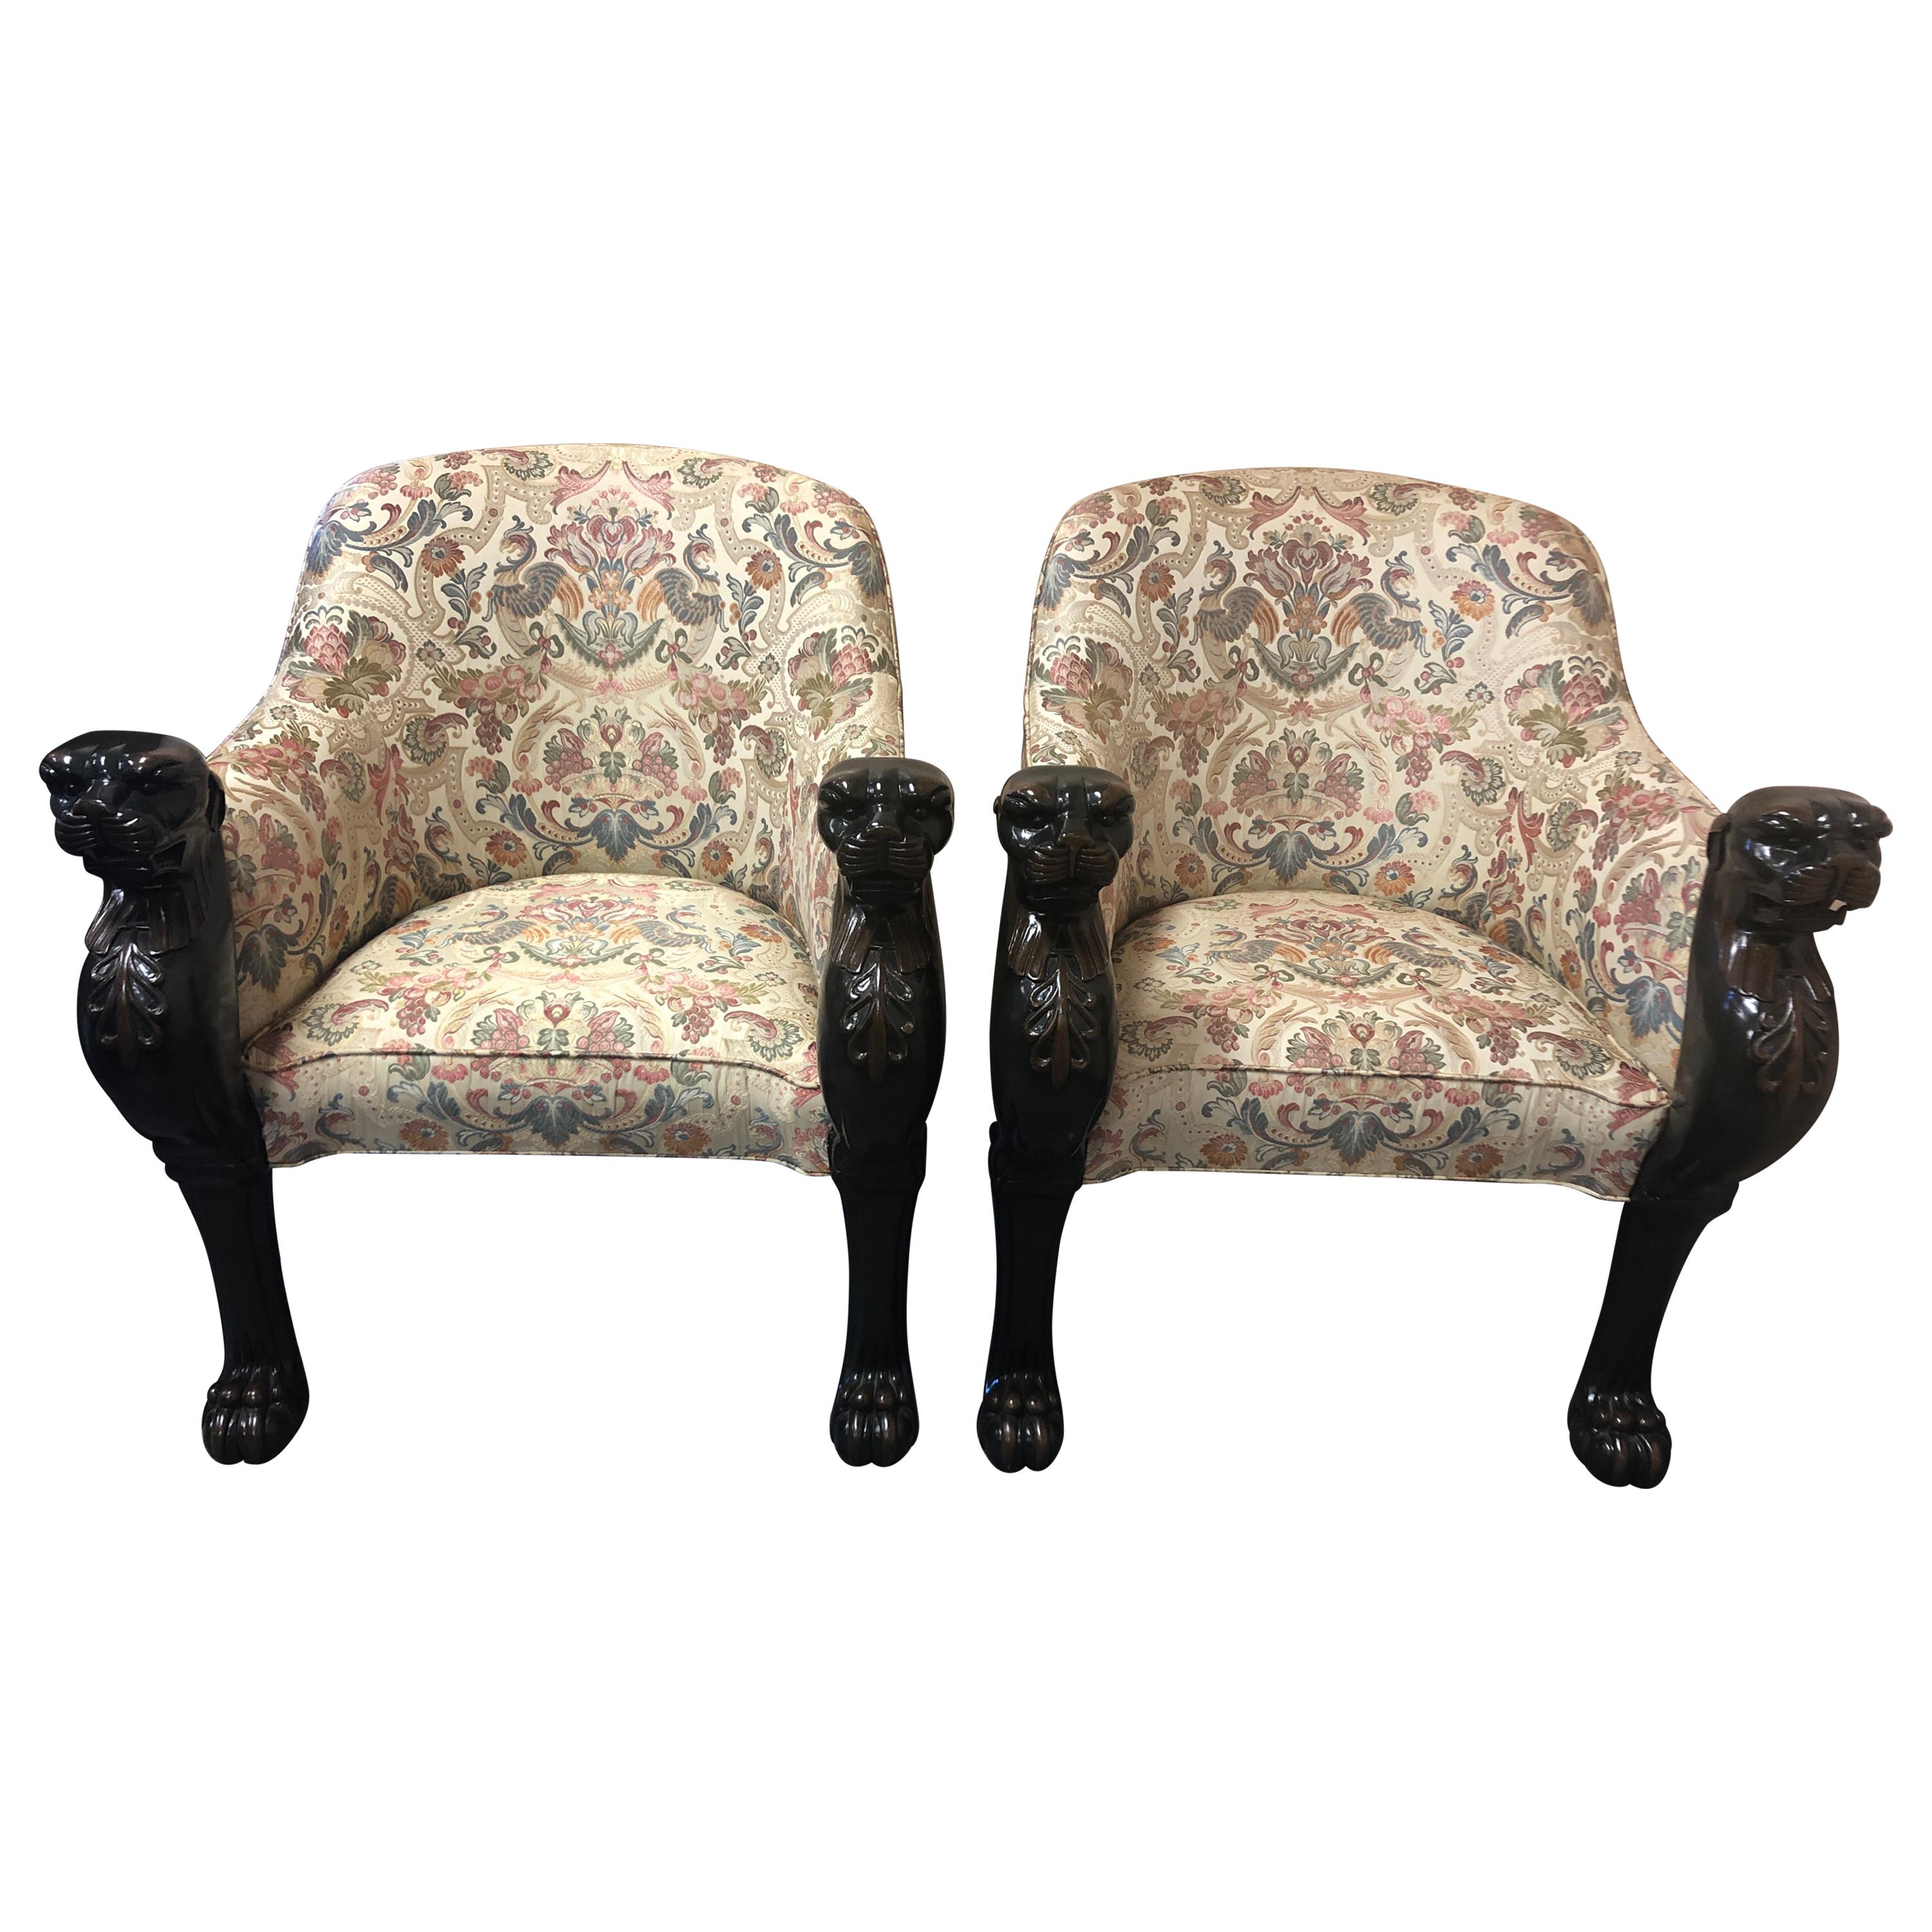 Super Dramatic Pair of Carved Wood and Upholstered Panther Club Chairs